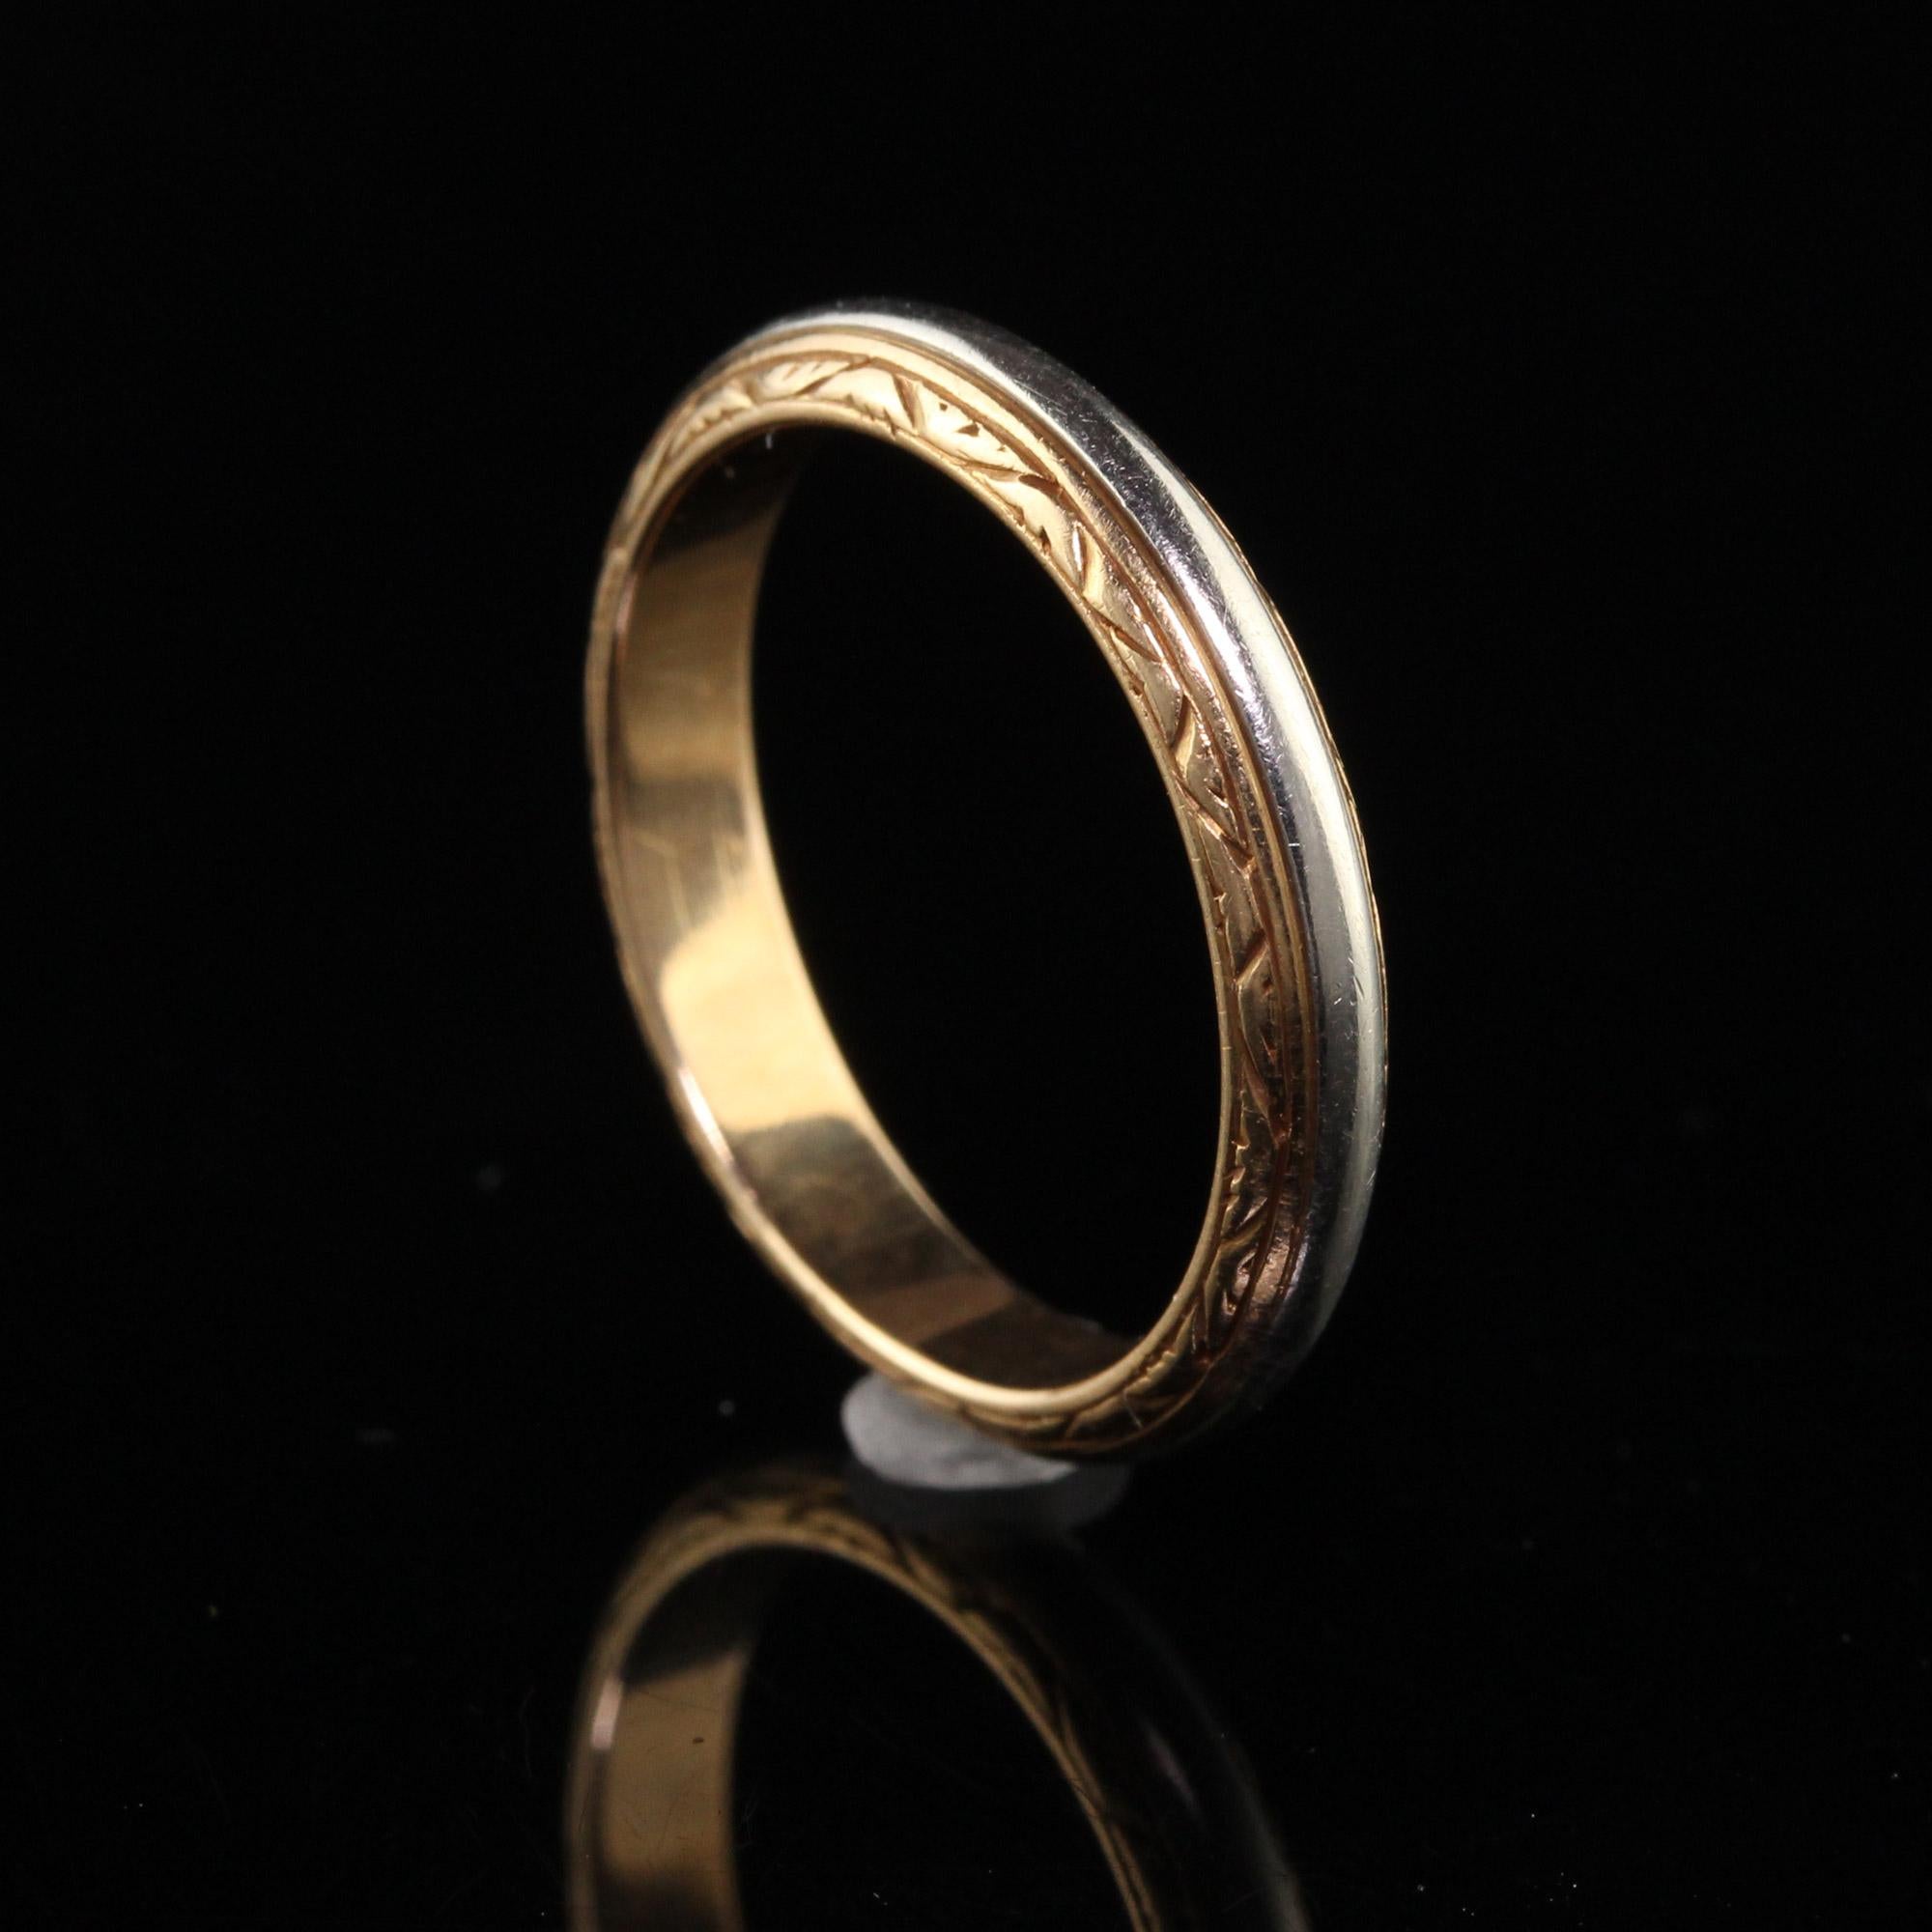 Antique Art Deco 18K Yellow Gold and White Gold Engraved Wedding Band For Sale 1